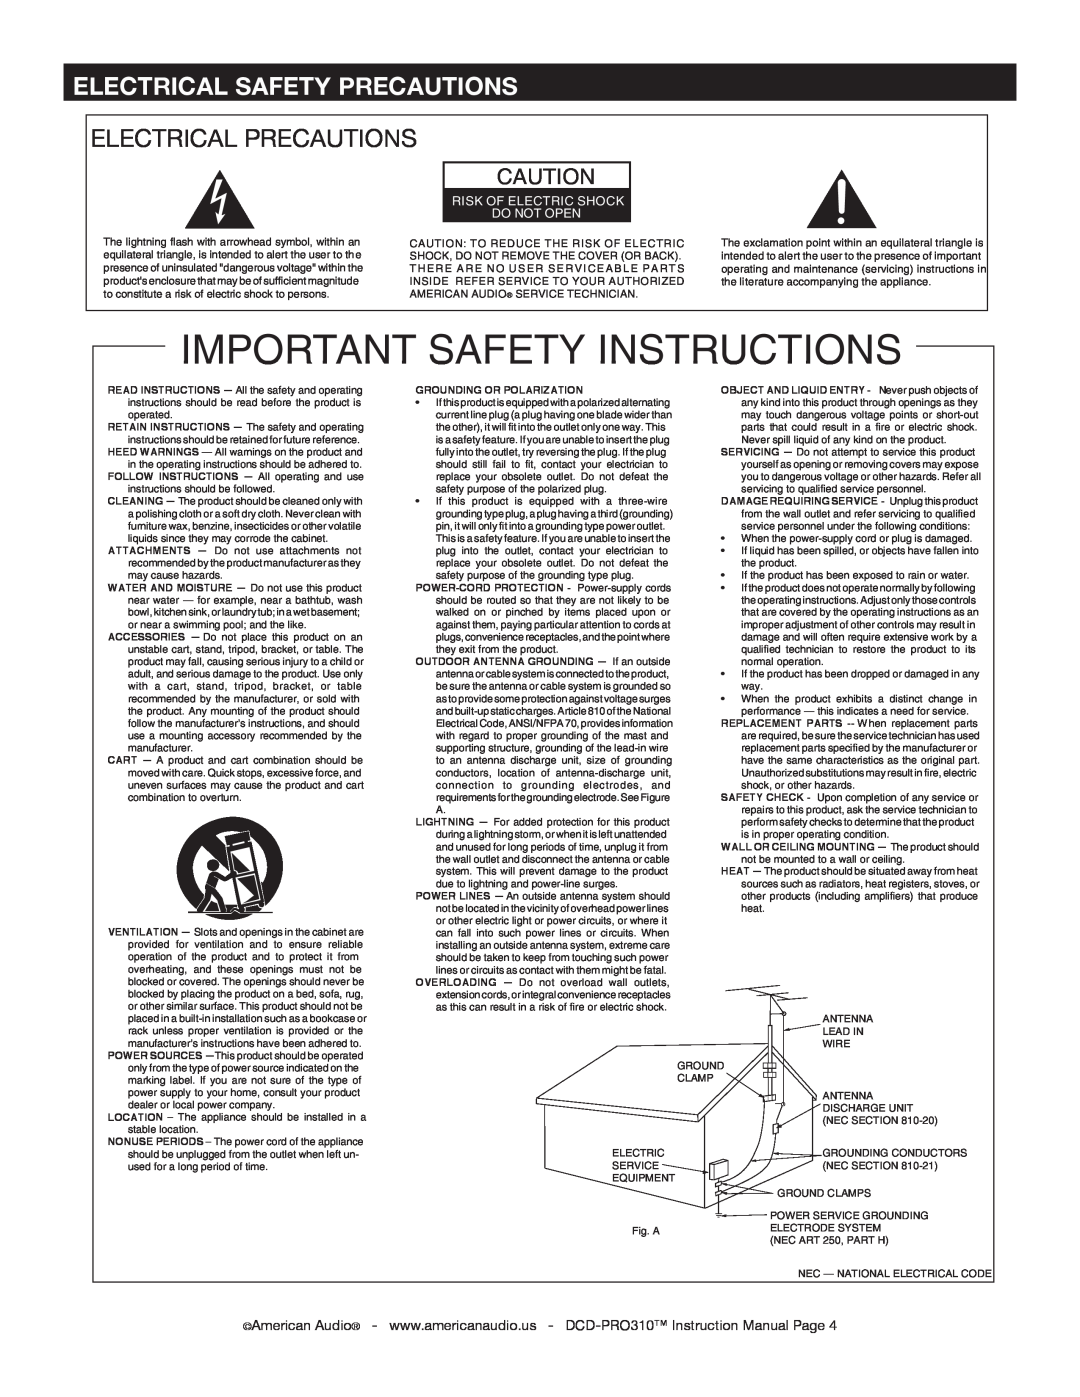 American Audio DCD-PRO310 Electrical Precautions, Important Safety Instructions, Electrical Safety Precautions 